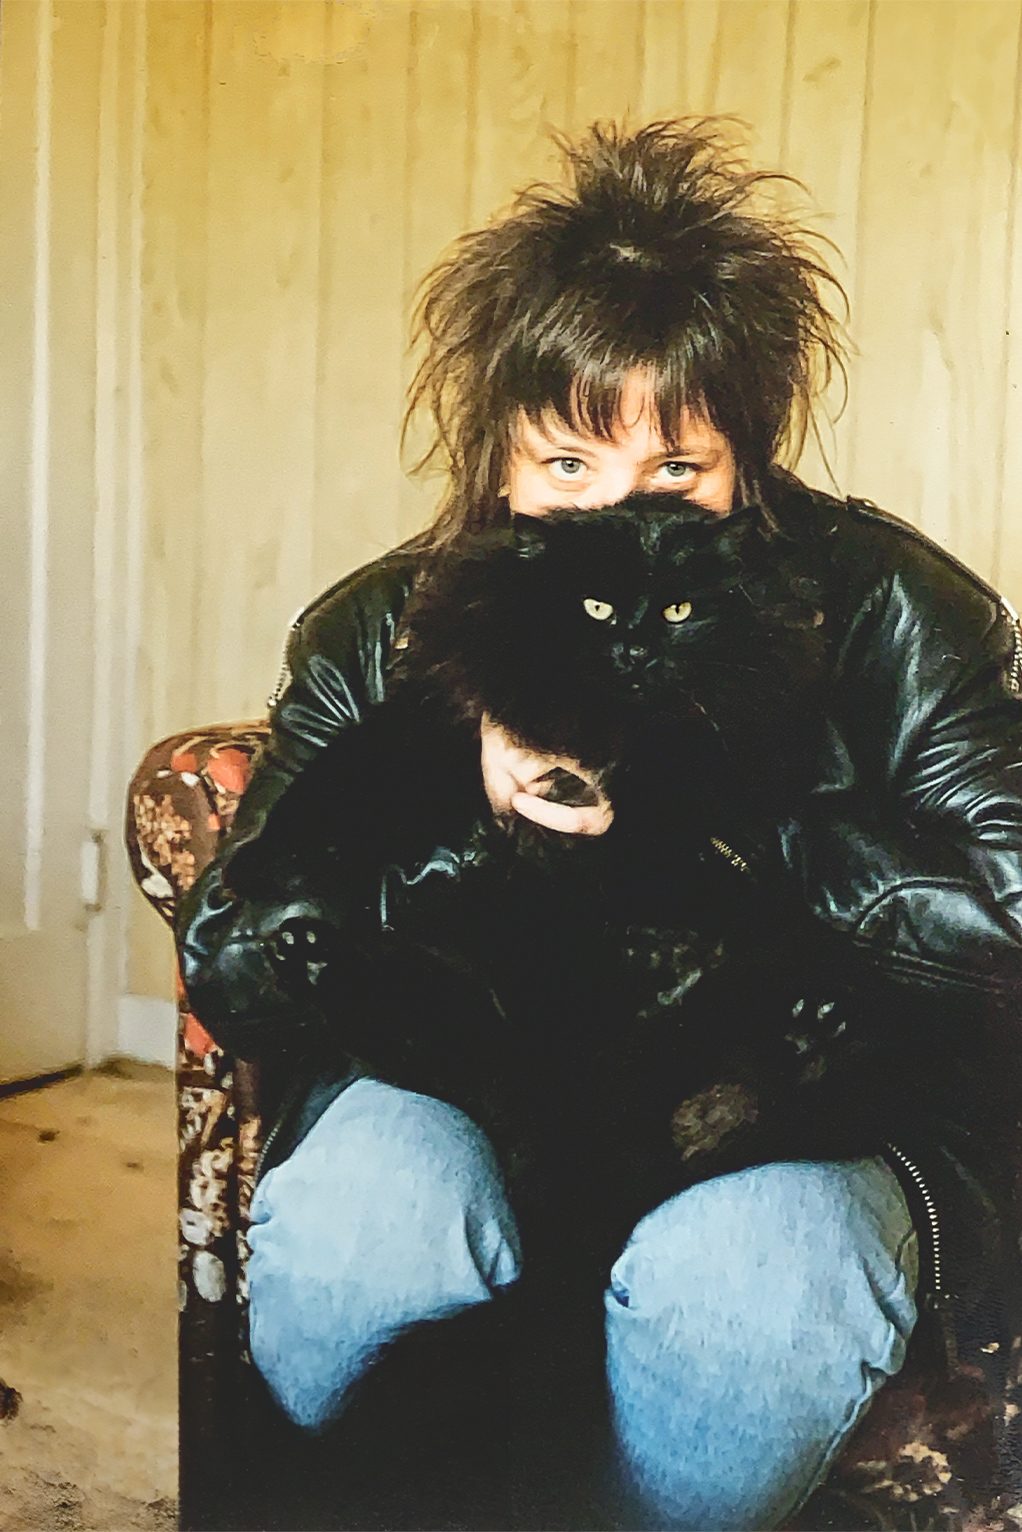 A woman holding a black cat